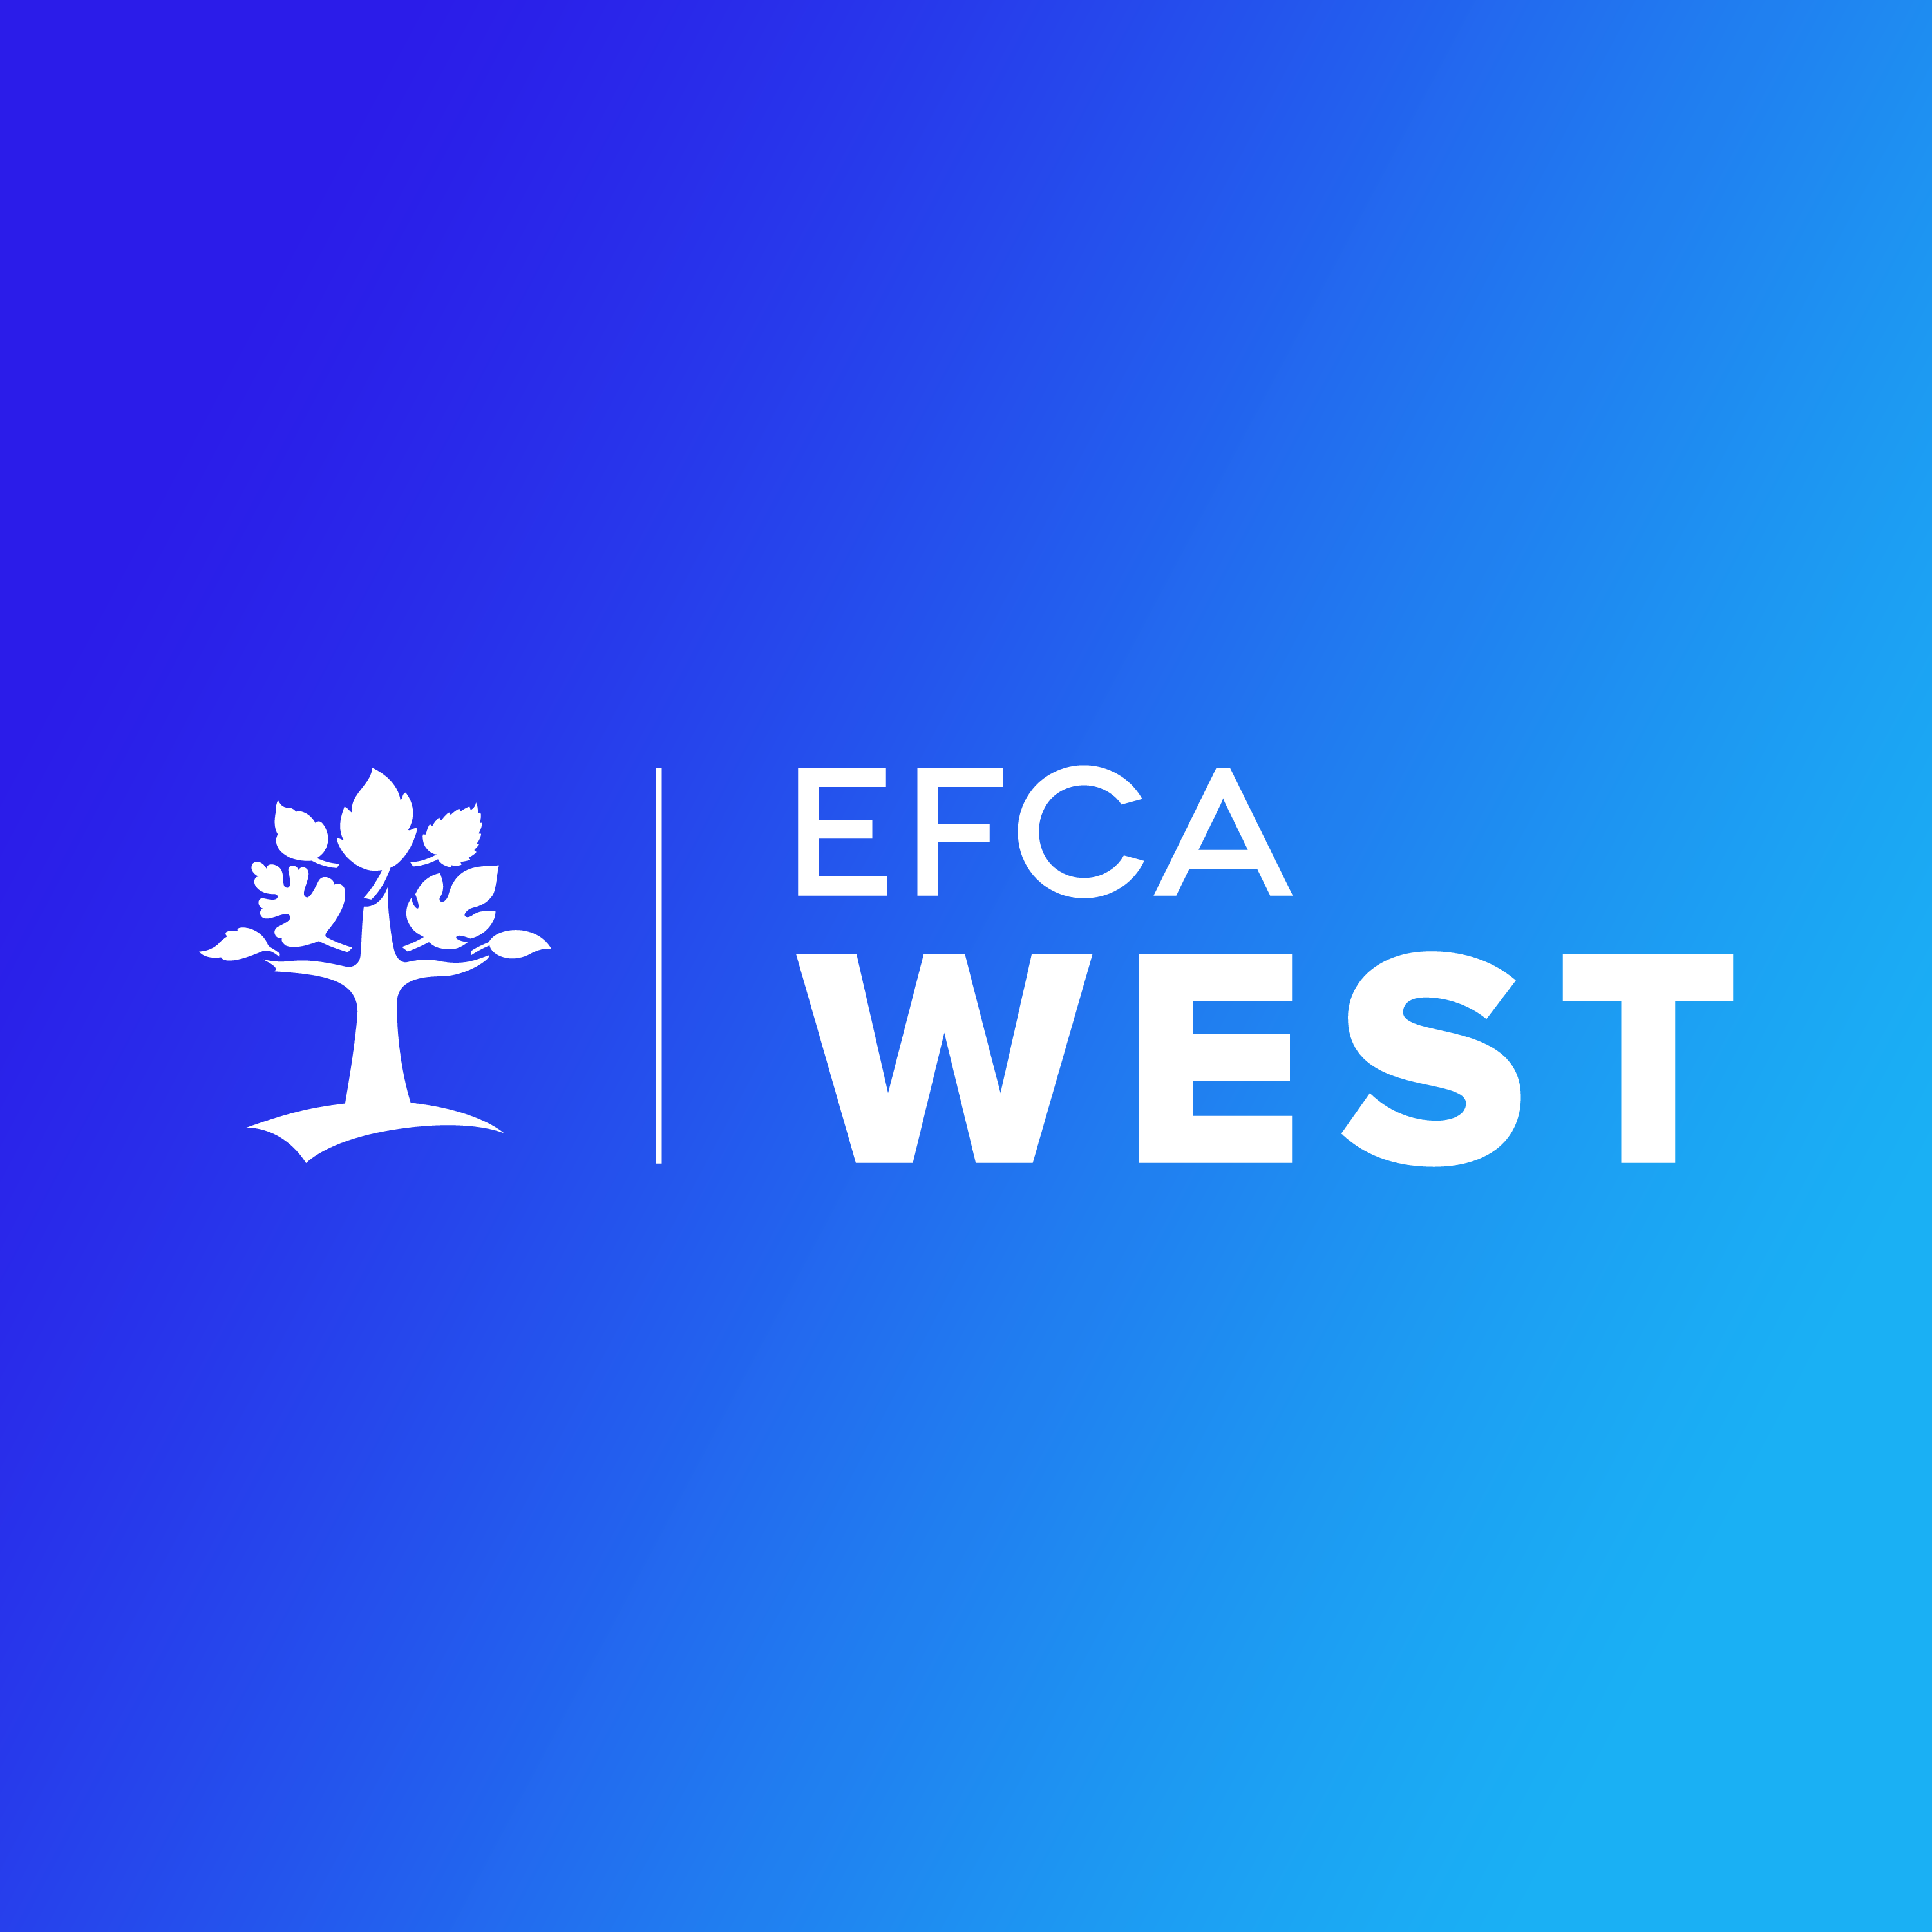 The EFCA West Podcast